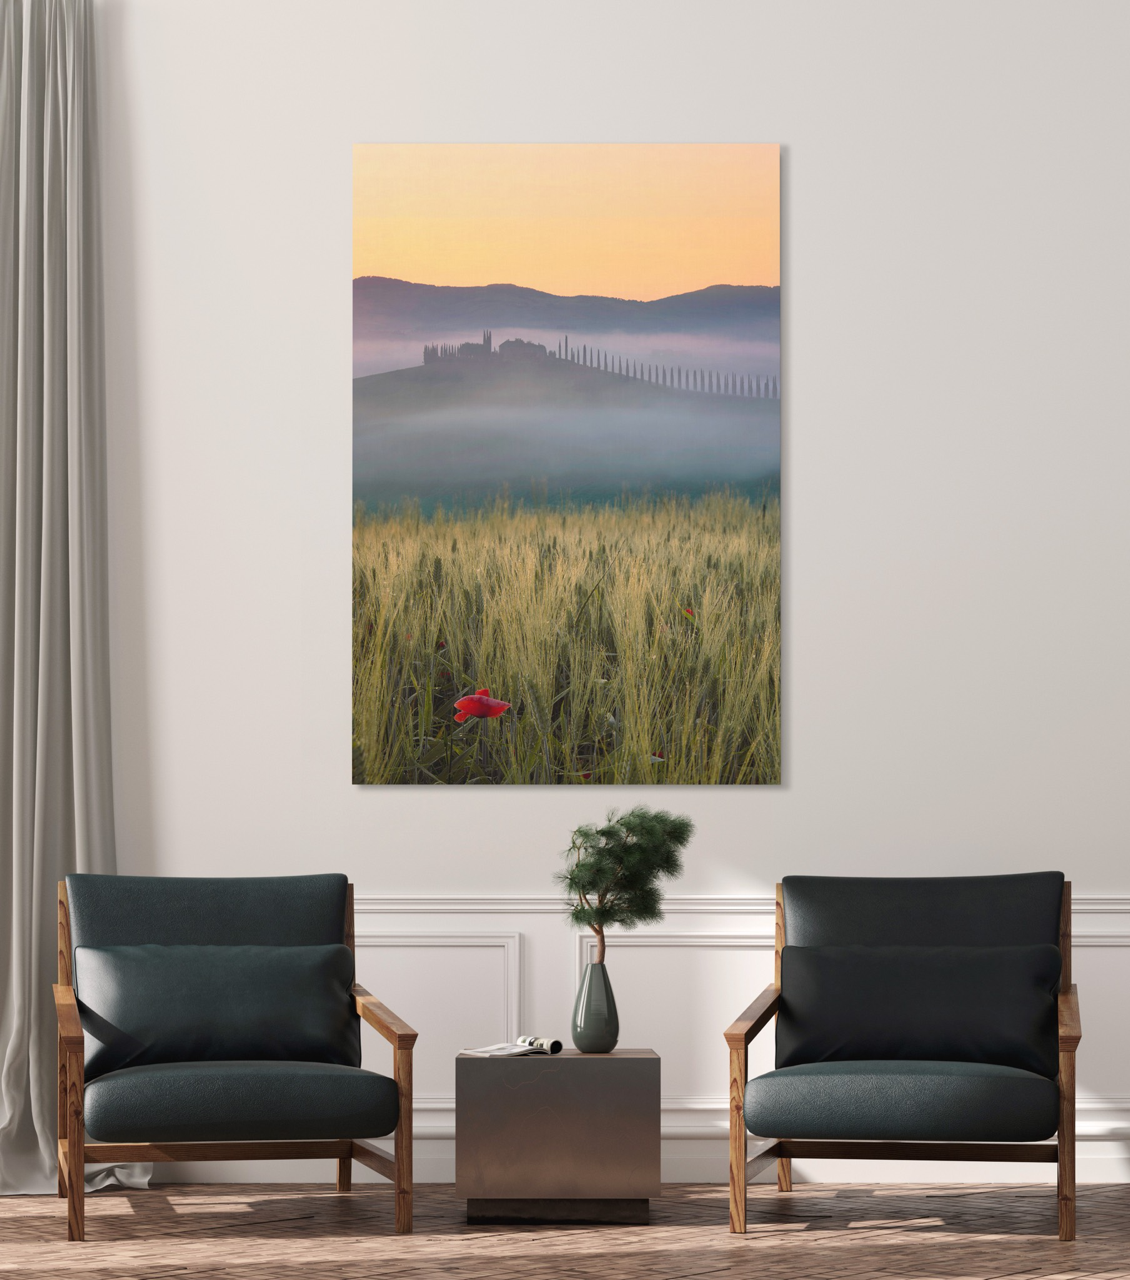 mid century modern chairs with a large sunset photography print